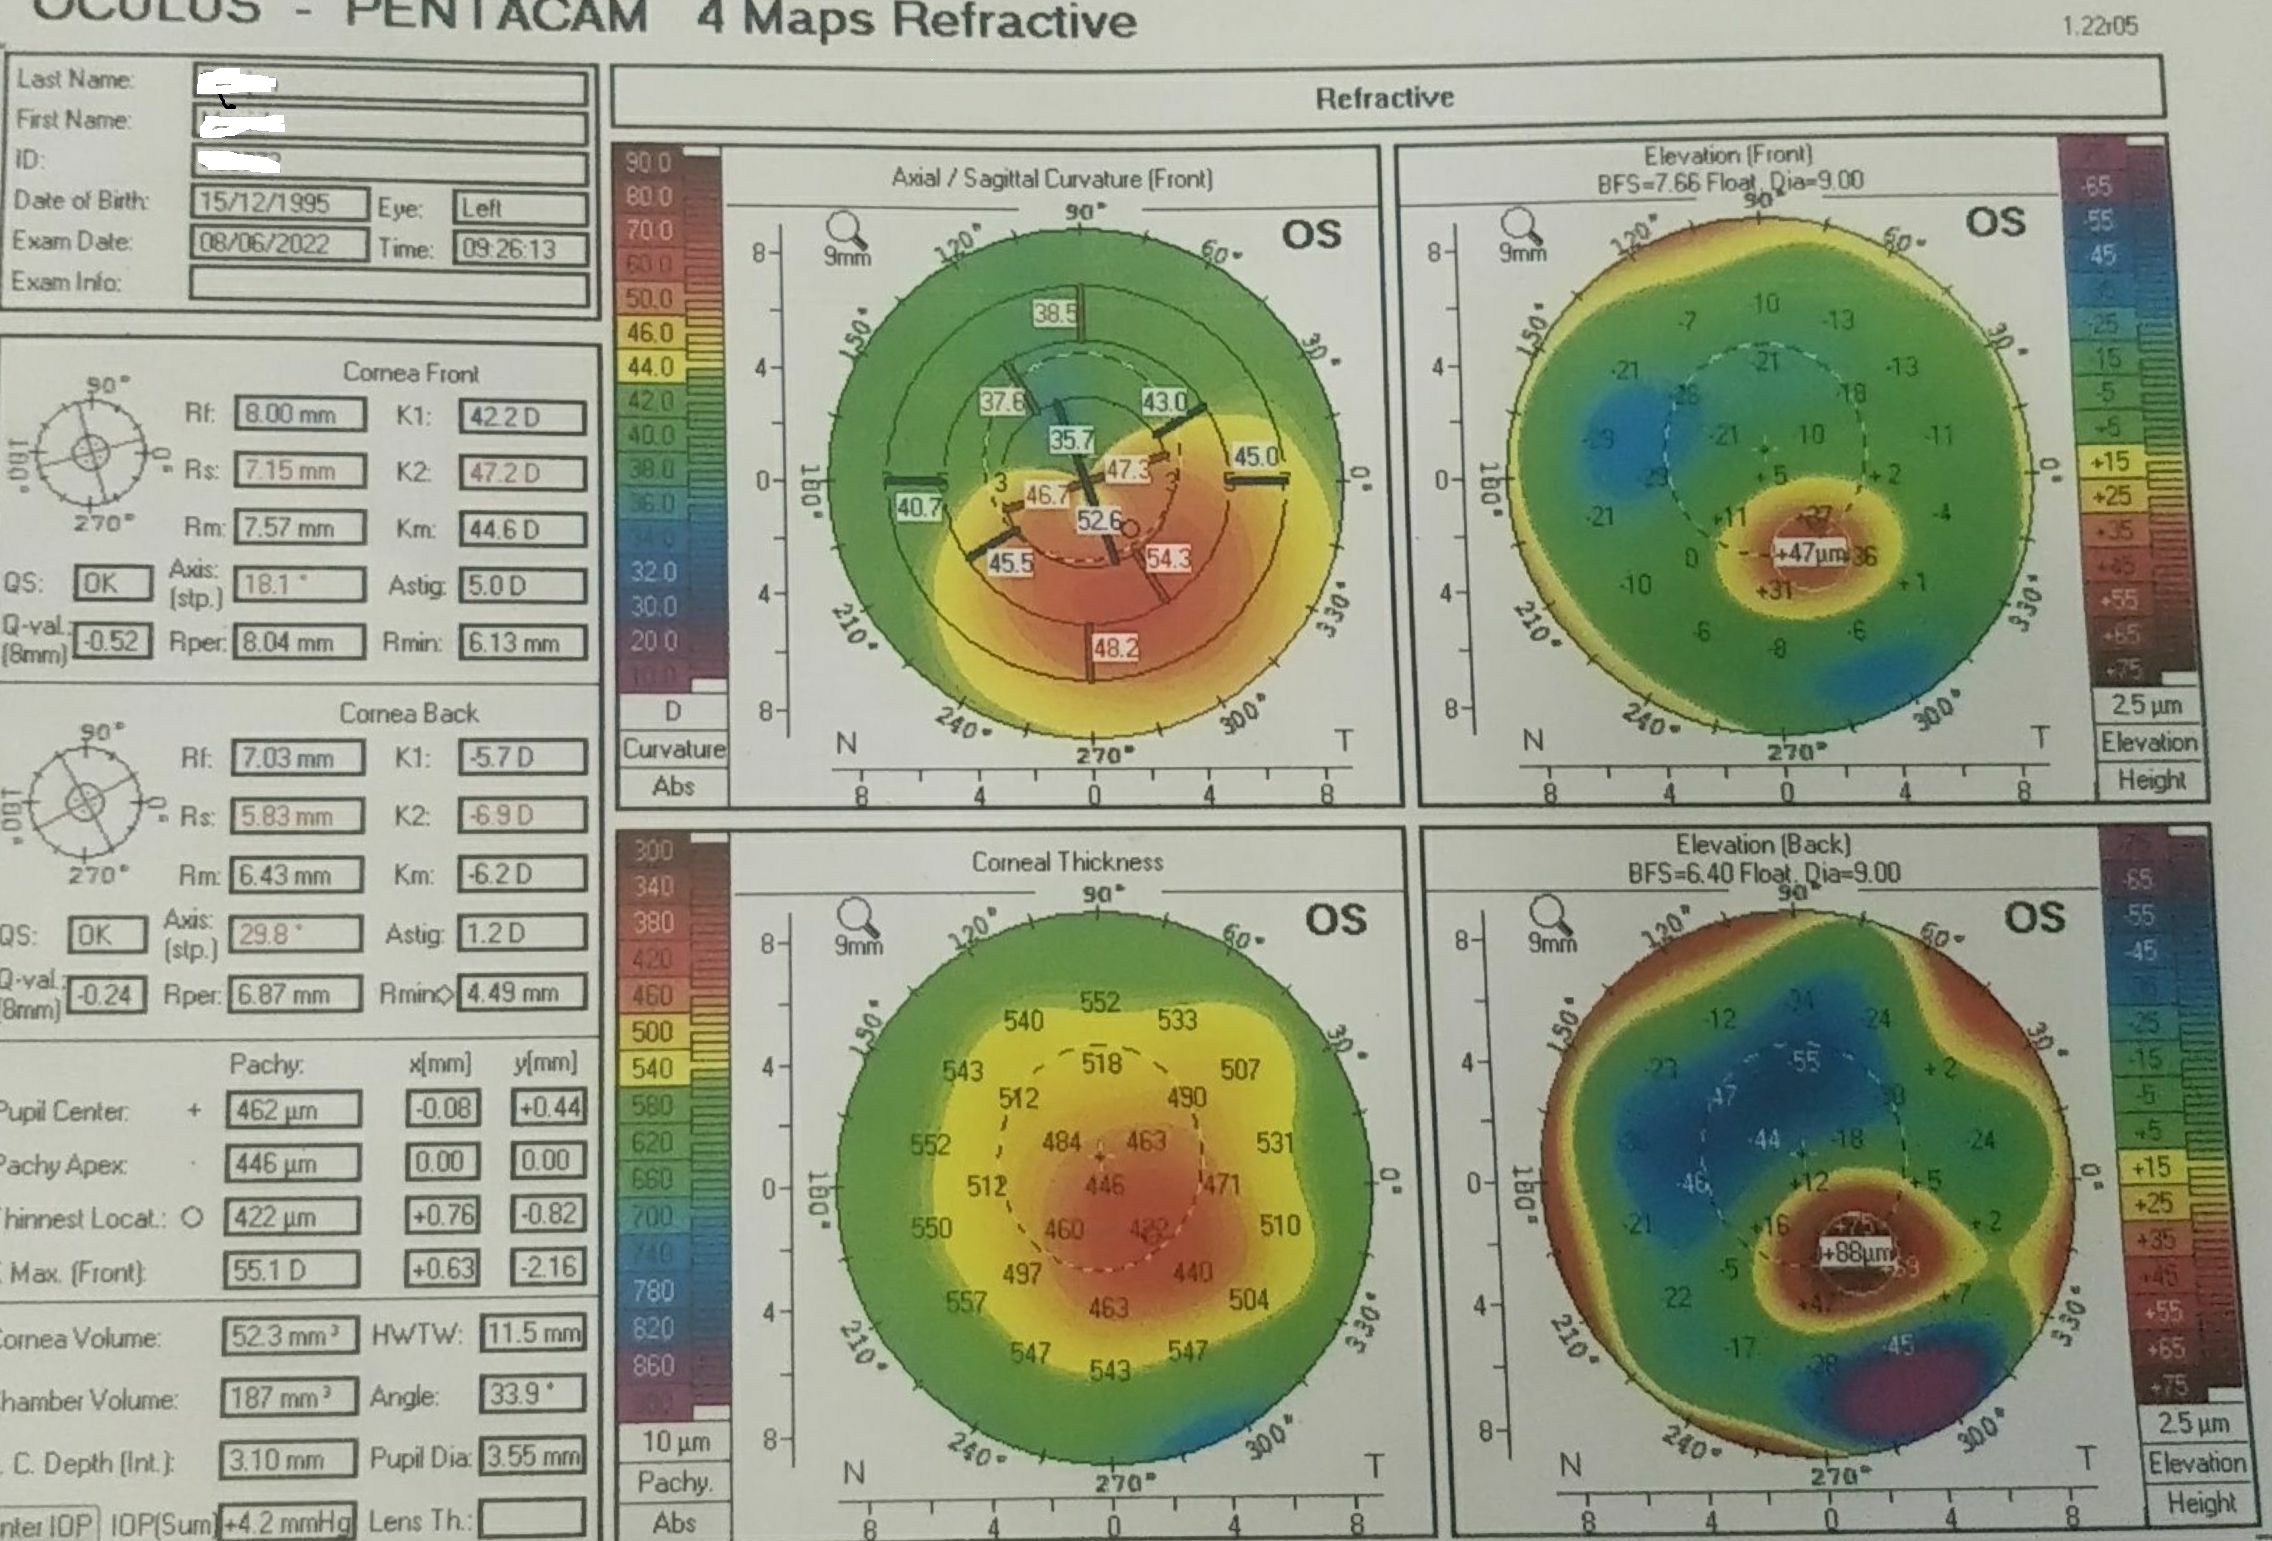 Two years post collagen crosslinking Pentacam  topogtraphy (4 map refractive) of a 25 year old male .